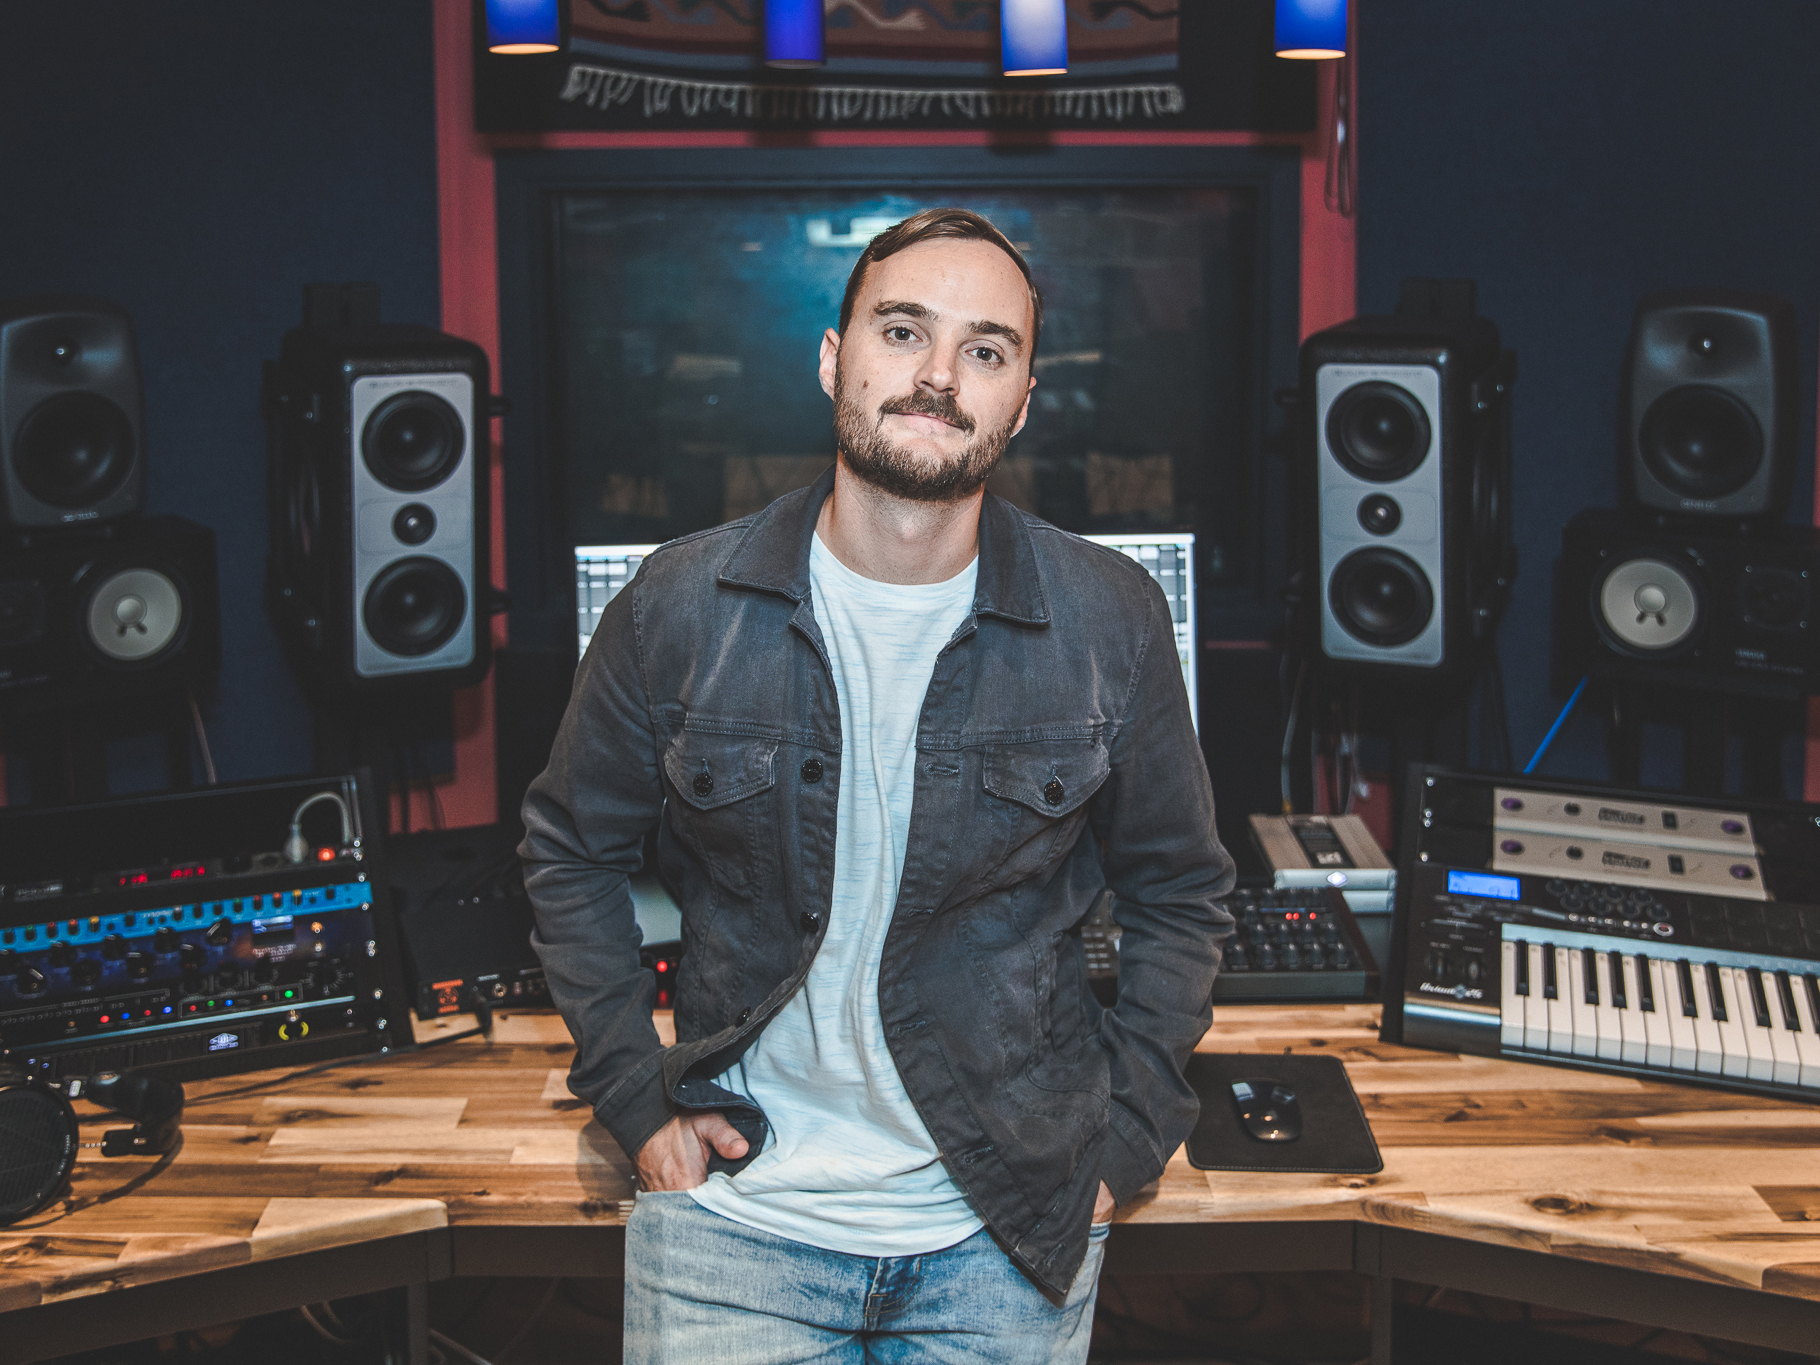 Founder and CEO of Westwood Recordings and one-half of The Funk Hunters, Nick Middleton, poses in the studio with the decks behind him. He's leaning against the desk, with his hands in his pockets, wearing a dark grey jacket over an off-white t-shirt and light blue jeans.